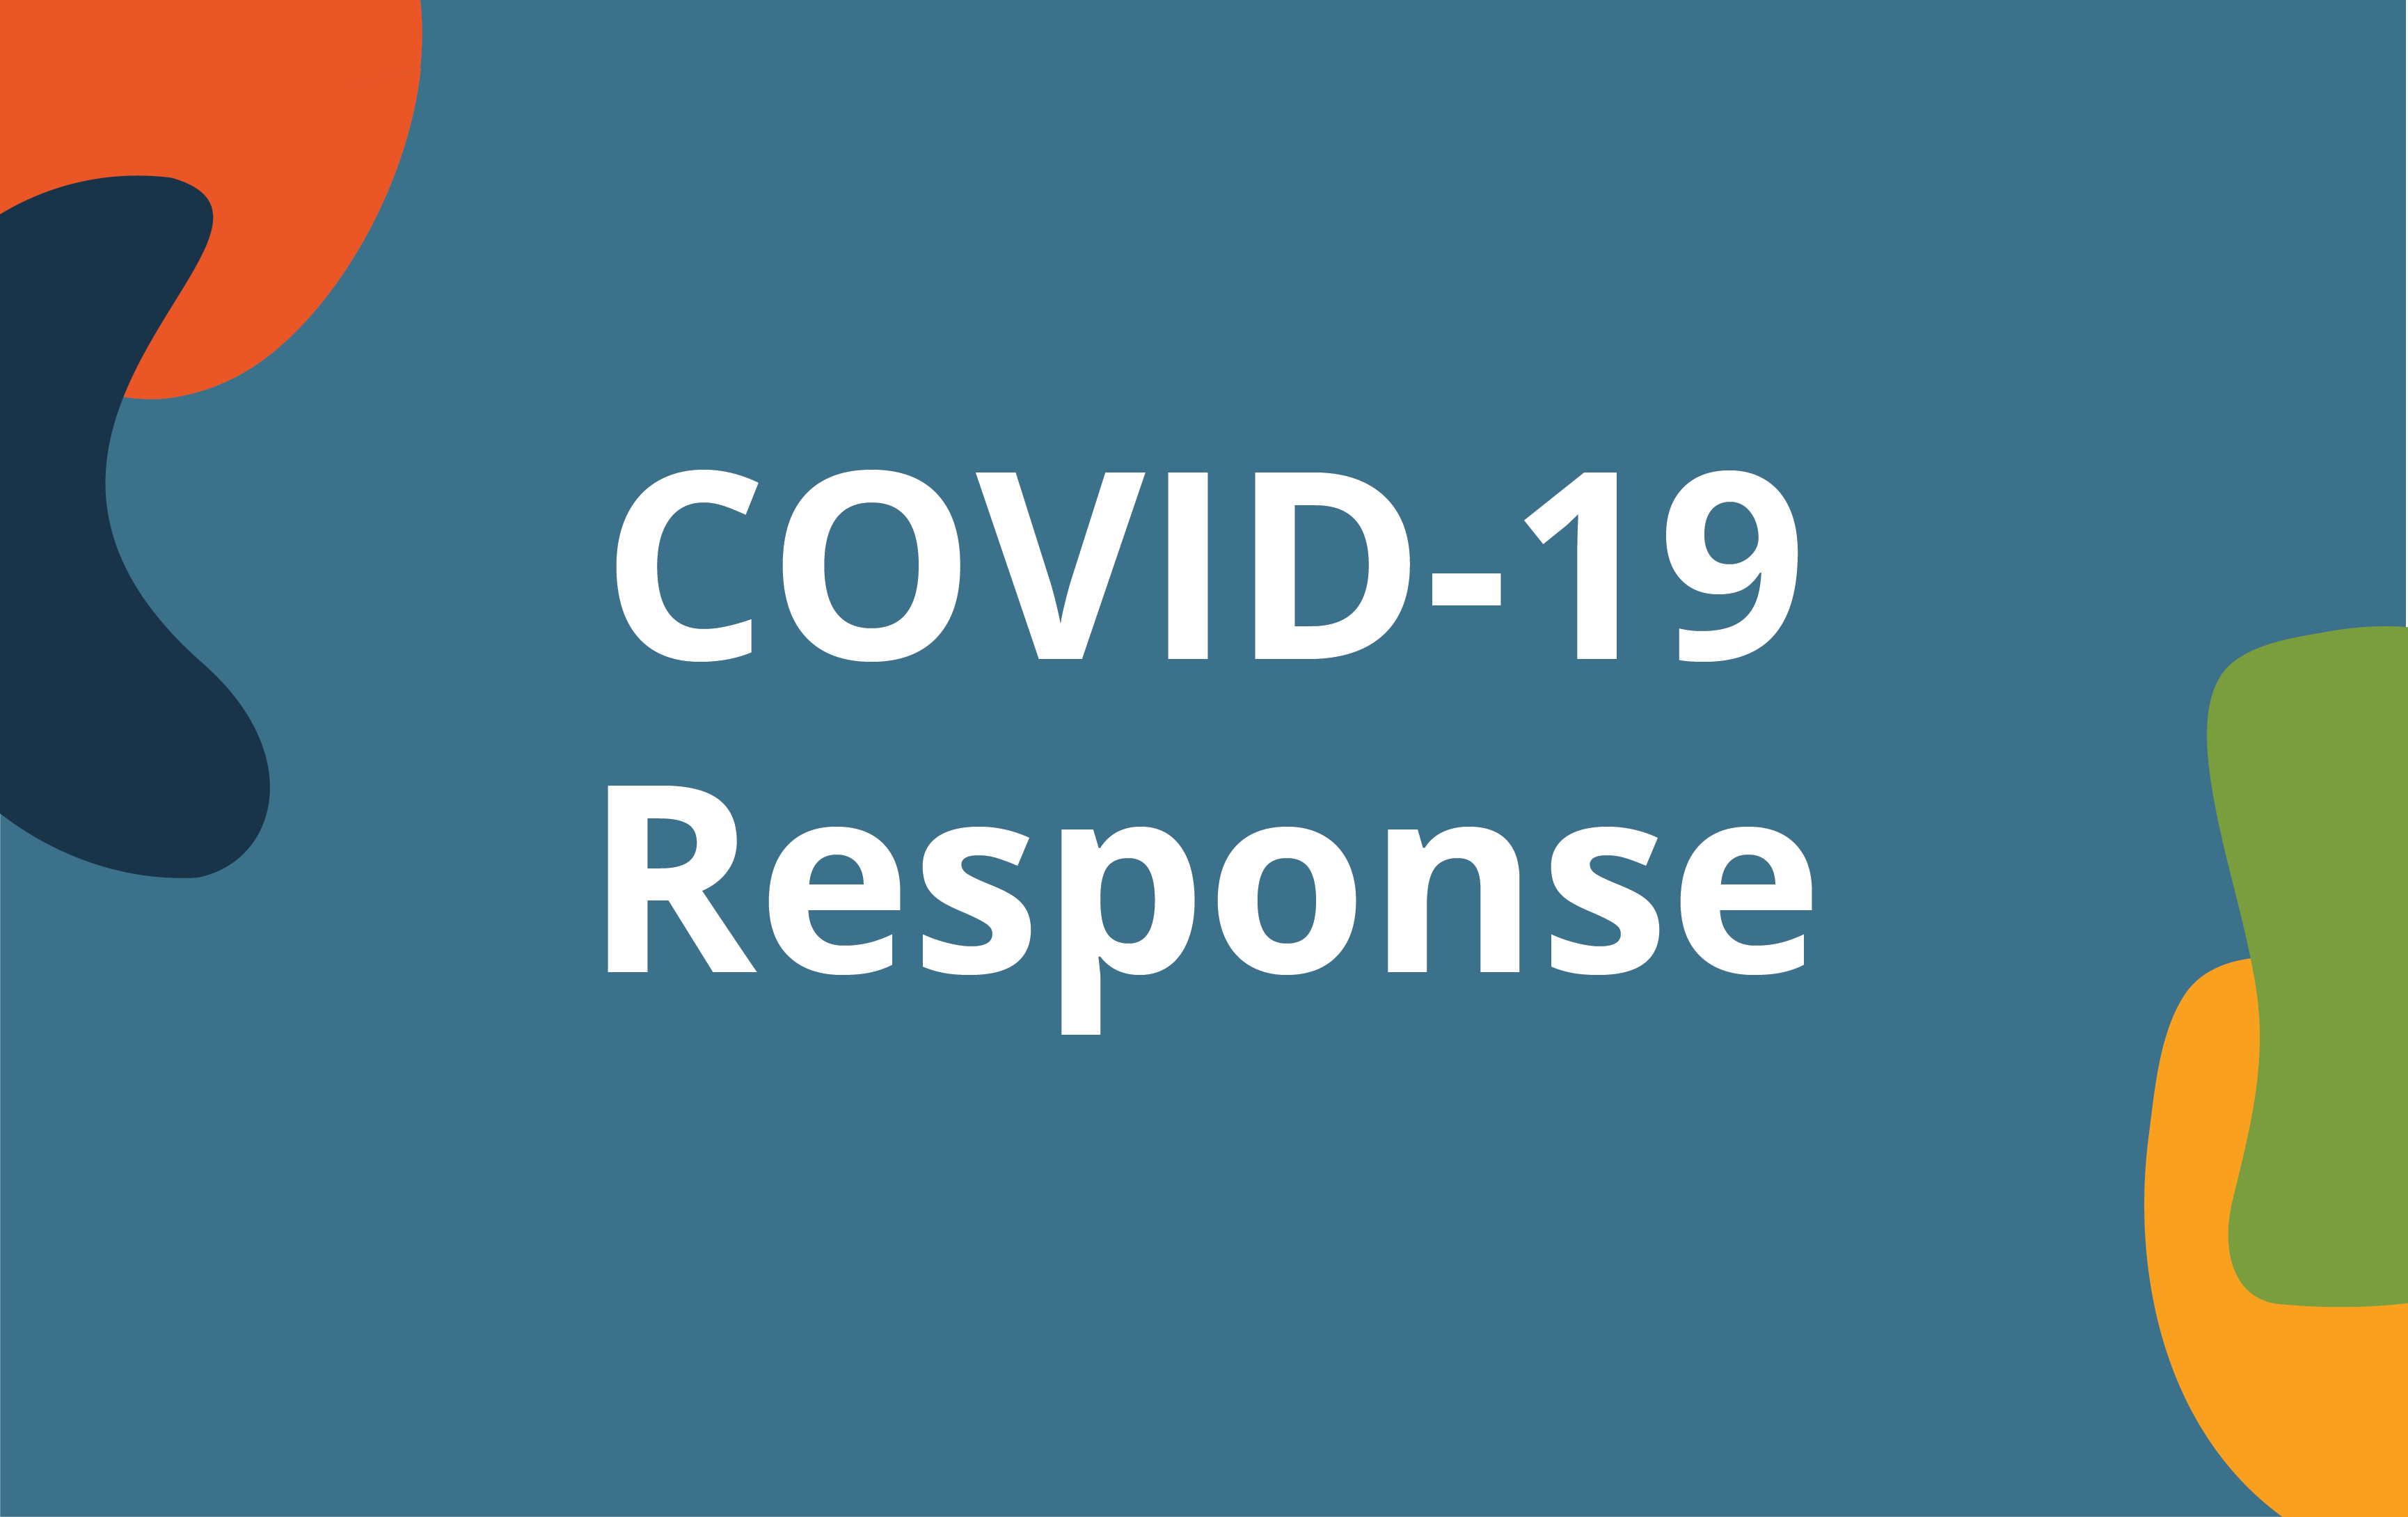 Introducing our COVID-19 Response Platform